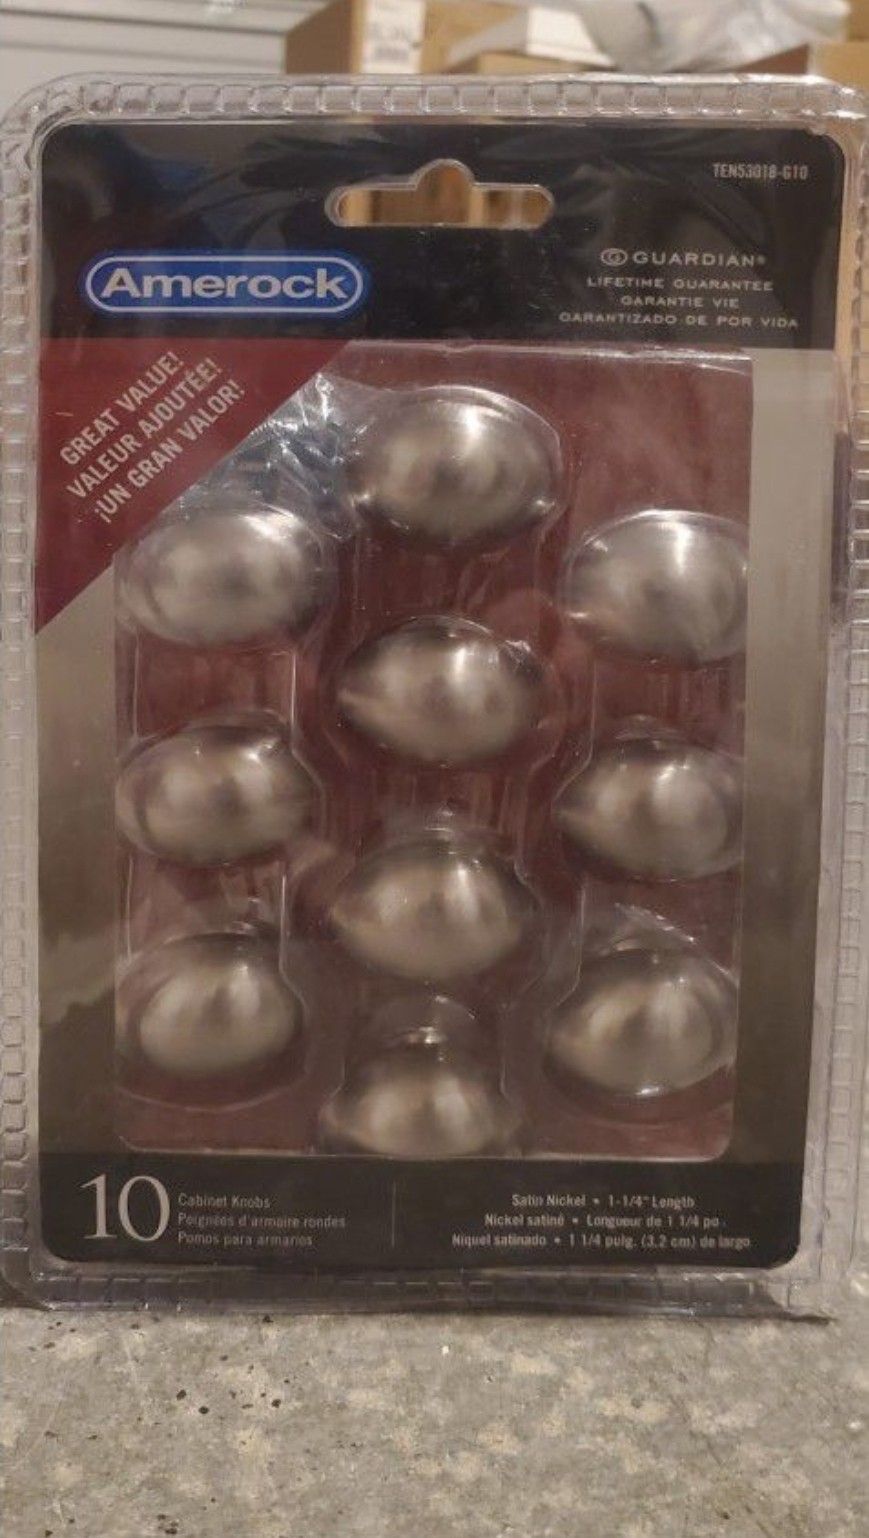 2 X 10 PACK of Football Knobs Cabinet Hardware in Satin Nickel